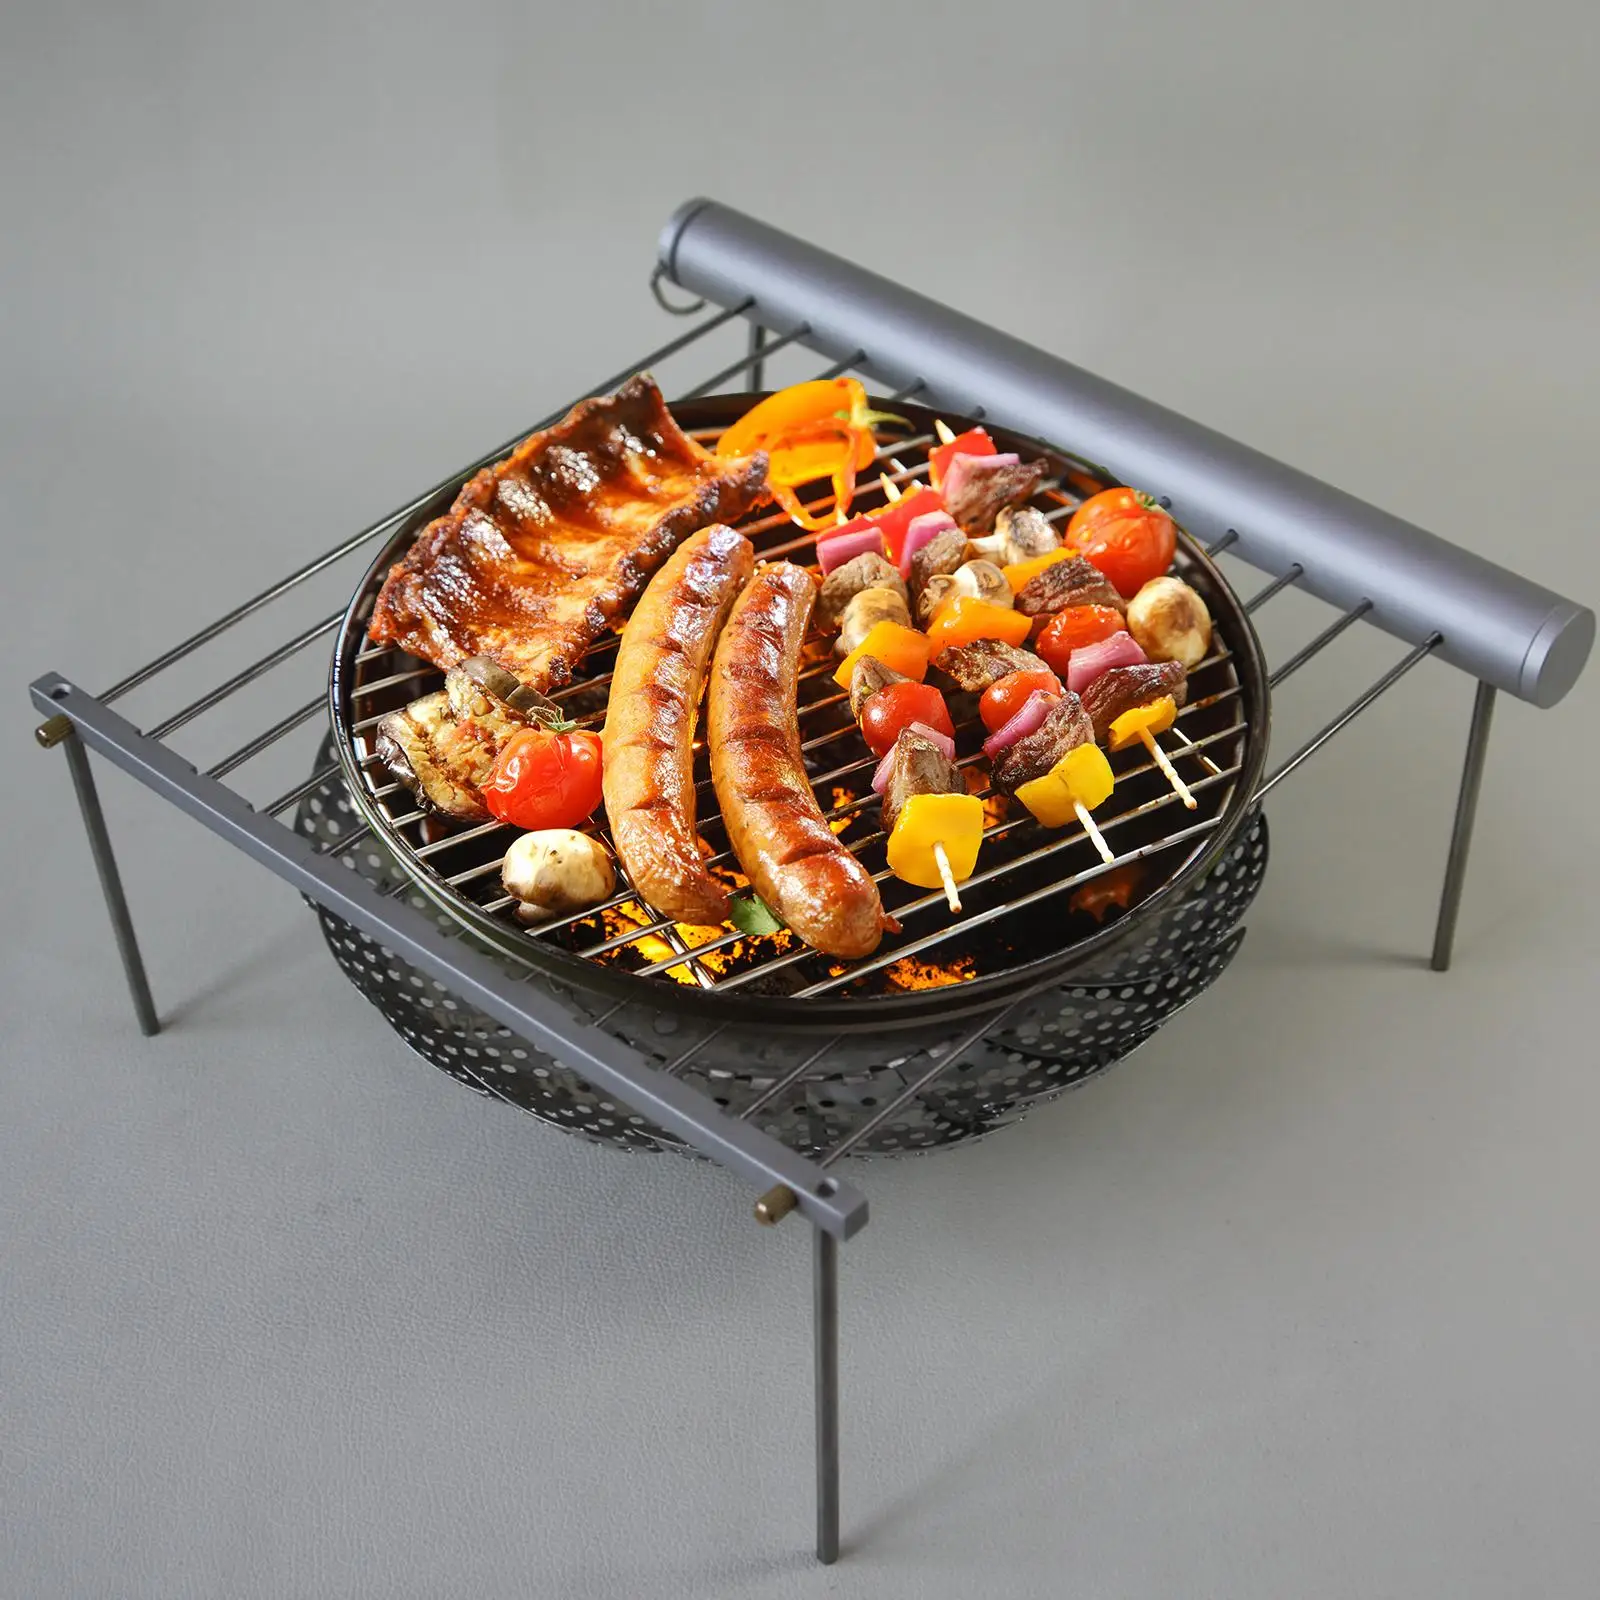 Portable BBQ Grill Cooking Camping Outdoor Grilling Accessories Picnic Stove